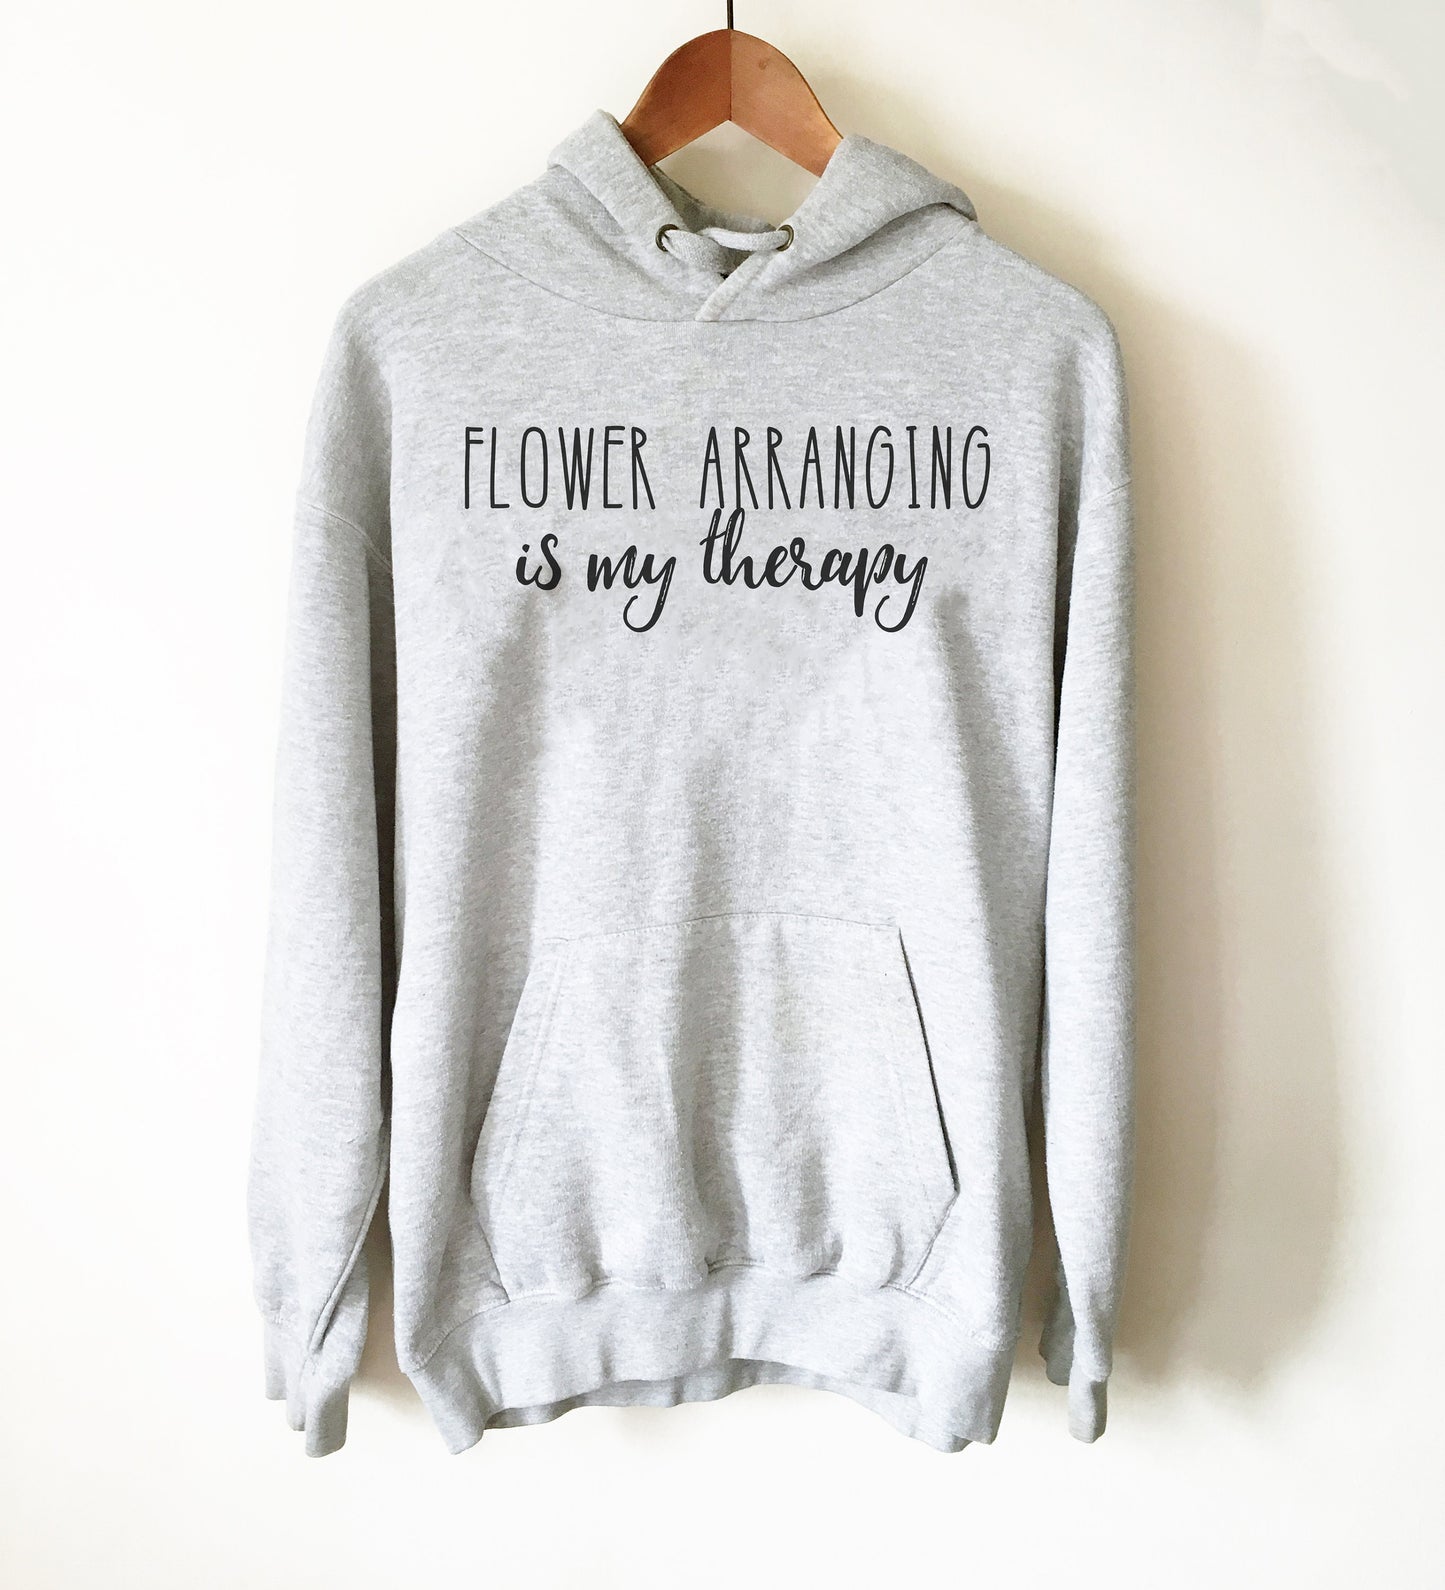 Flower Arranging Is My Therapy Hoodie - Florist Shirt, Florist Gift, Flower Arranging Gift, Flower Shirt, Flower Gift, Gardener Shirt